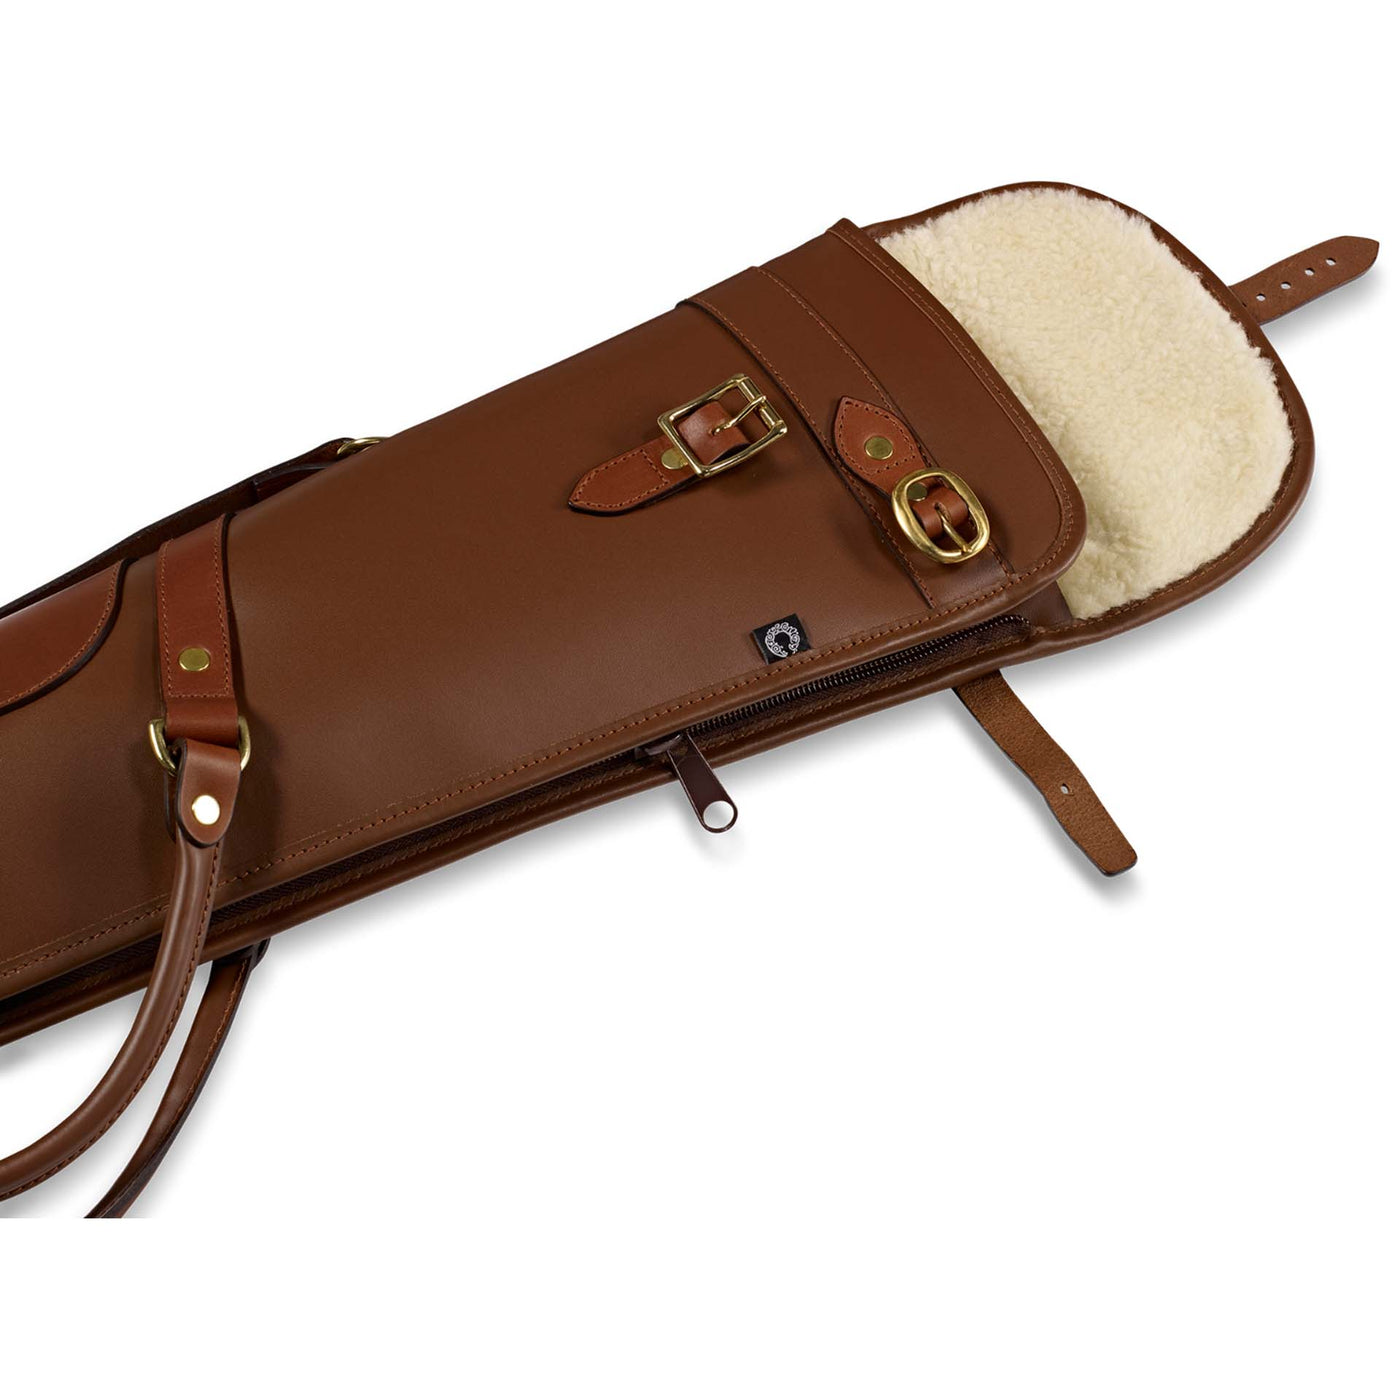 Byland Shotgun Slip With Flap, Zip and Carry Handles